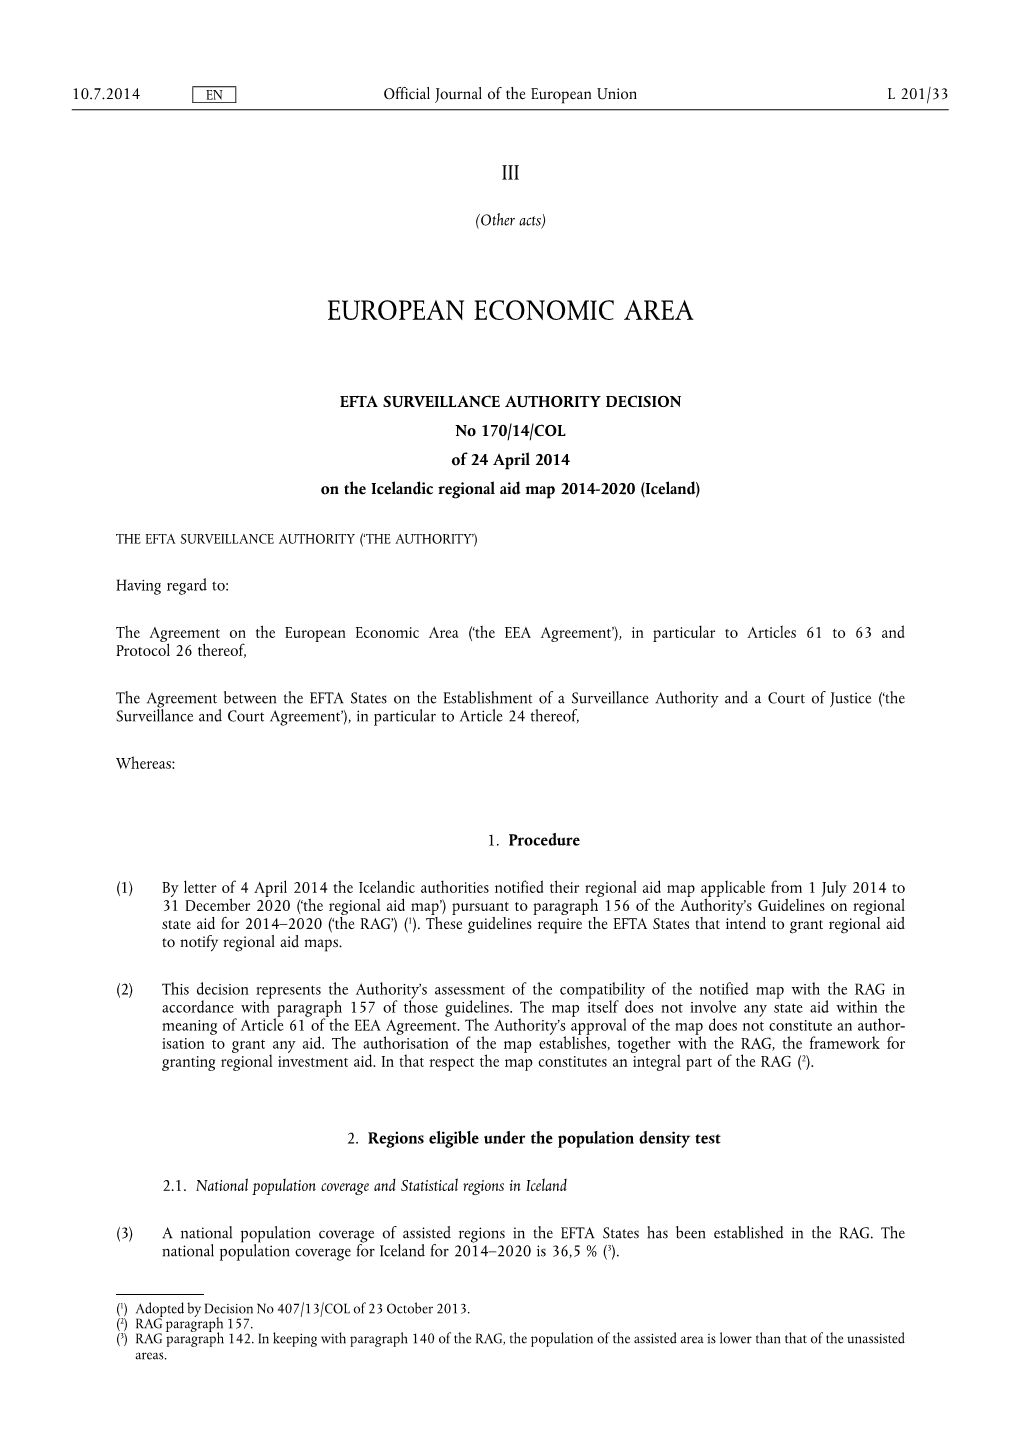 EFTA SURVEILLANCE AUTHORITY DECISION No 170/14/COL of 24 April 2014 on the Icelandic Regional Aid Map 2014-2020 (Iceland)